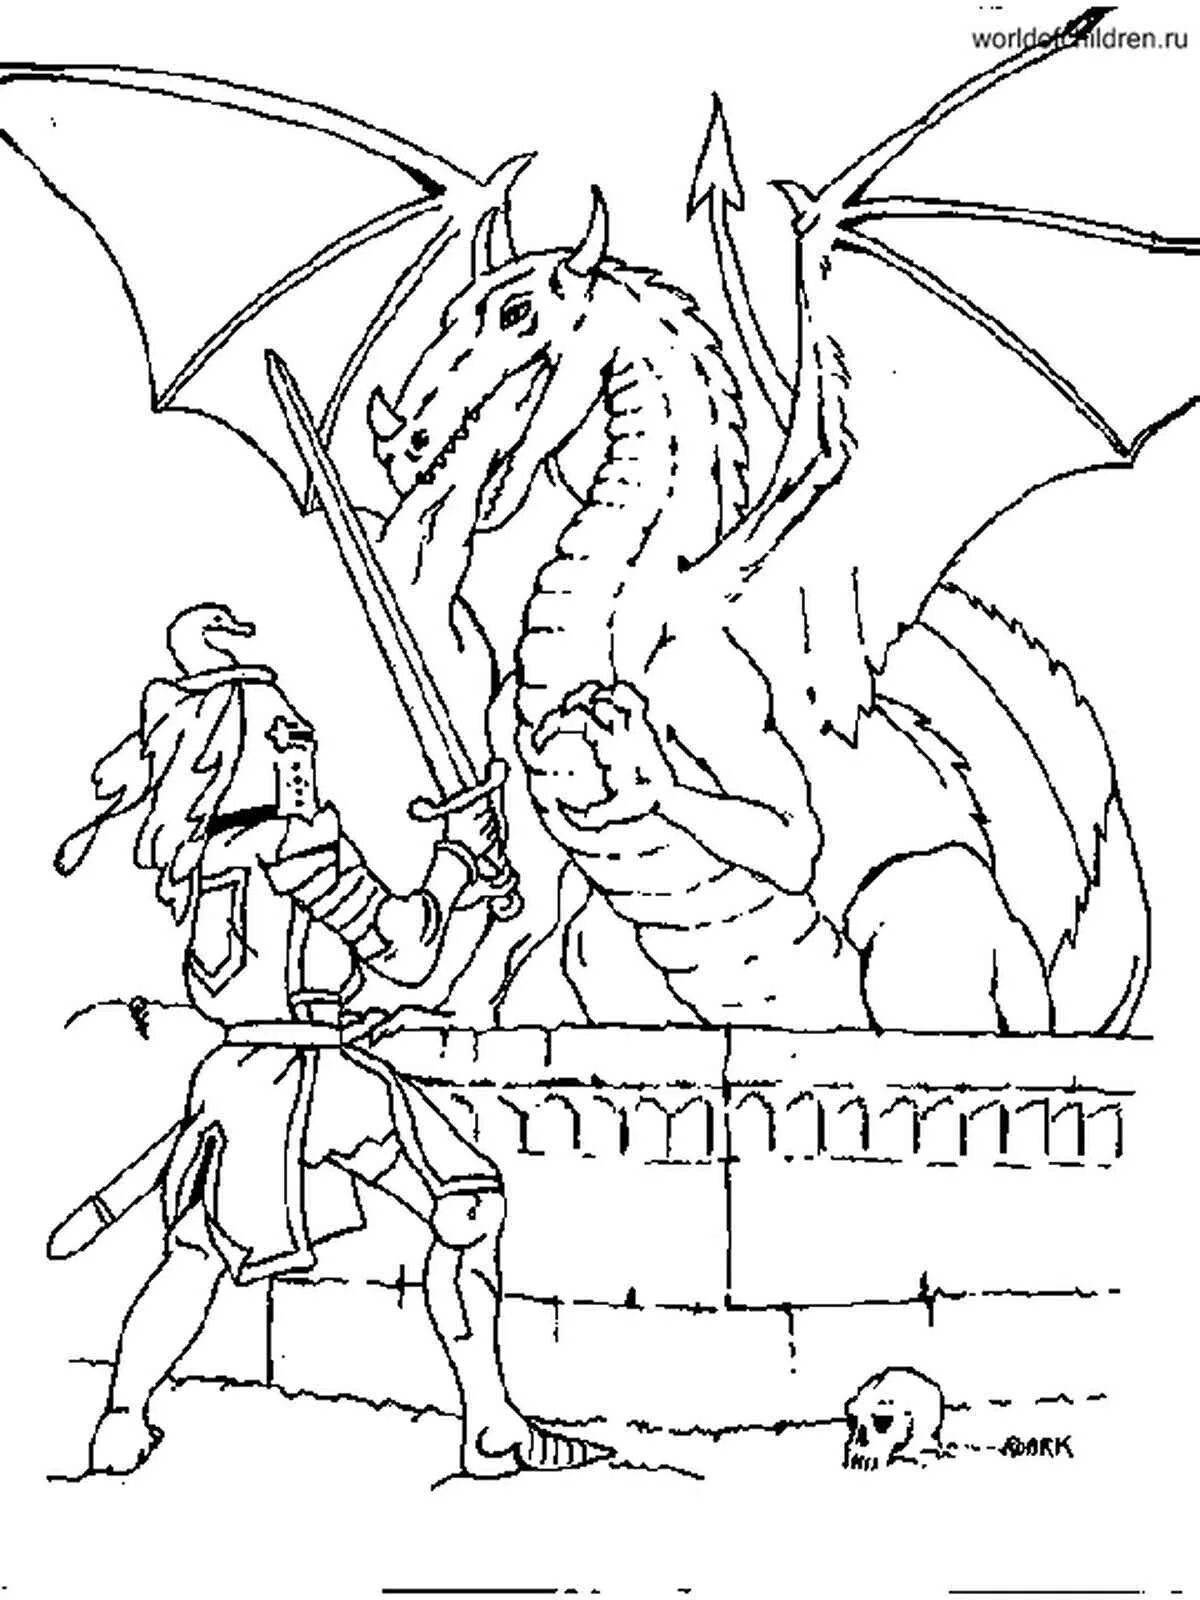 Exotic knight and dragon coloring page